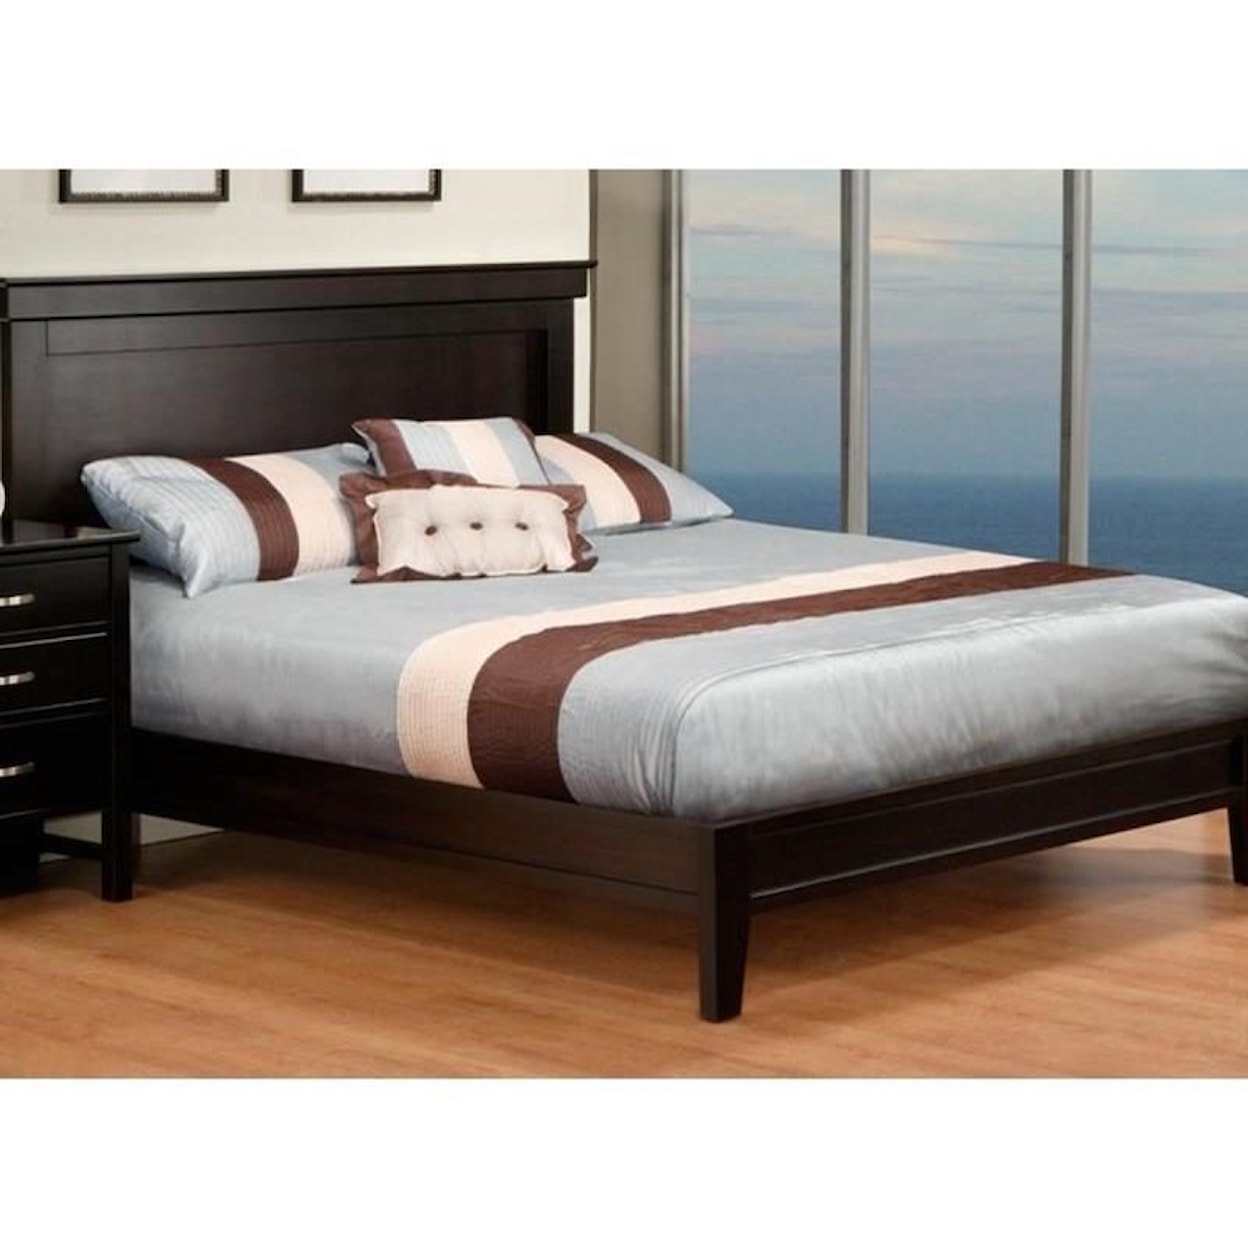 Handstone Brooklyn Full Bed with Wraparound Footboard